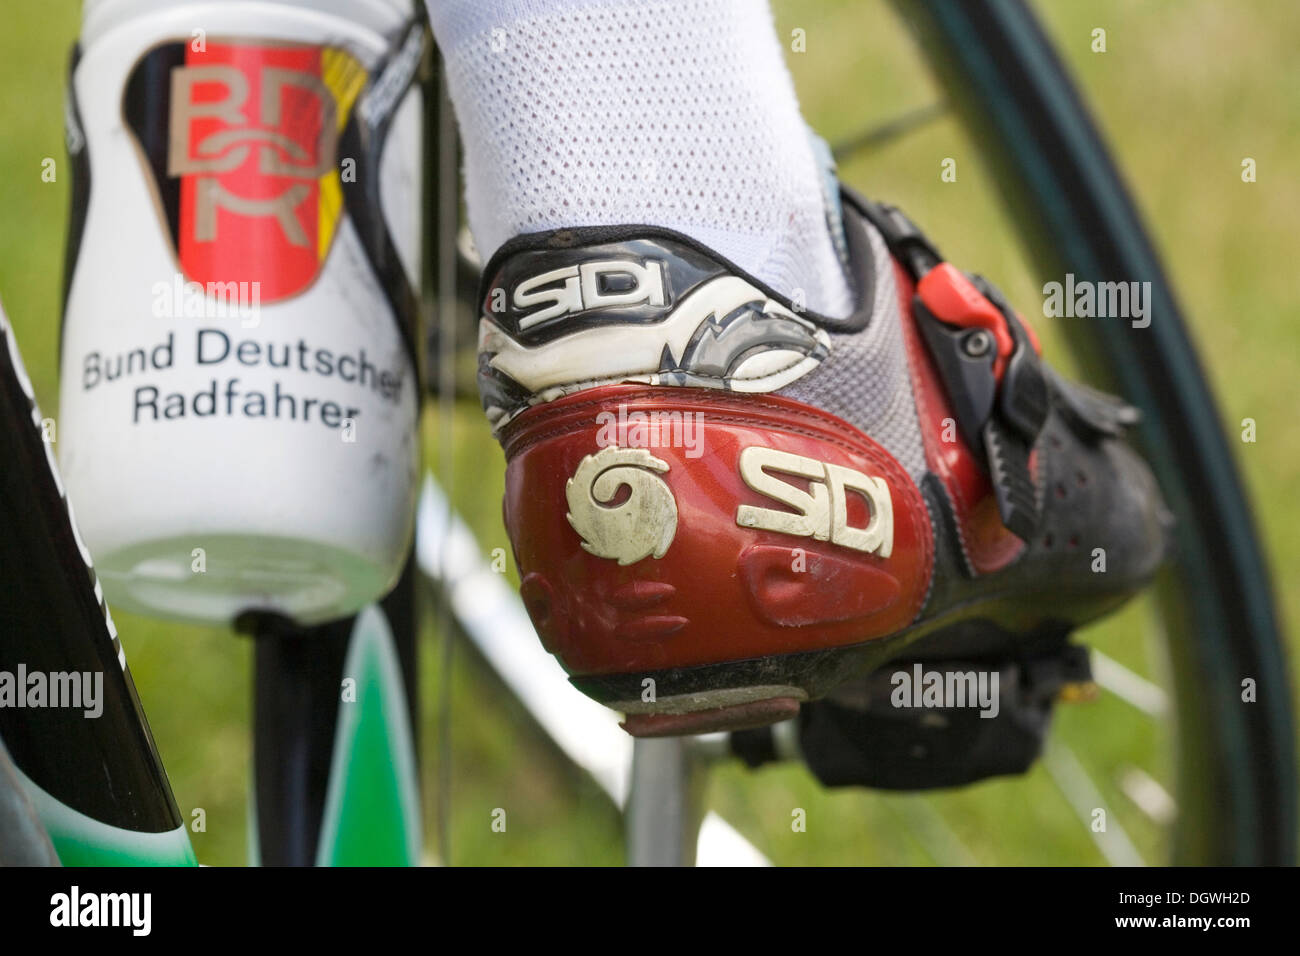 Right foot of a racing cyclist on a pedal, drinks bottle with the logo of the BDR, Bund Deutscher Rennfahrer Stock Photo